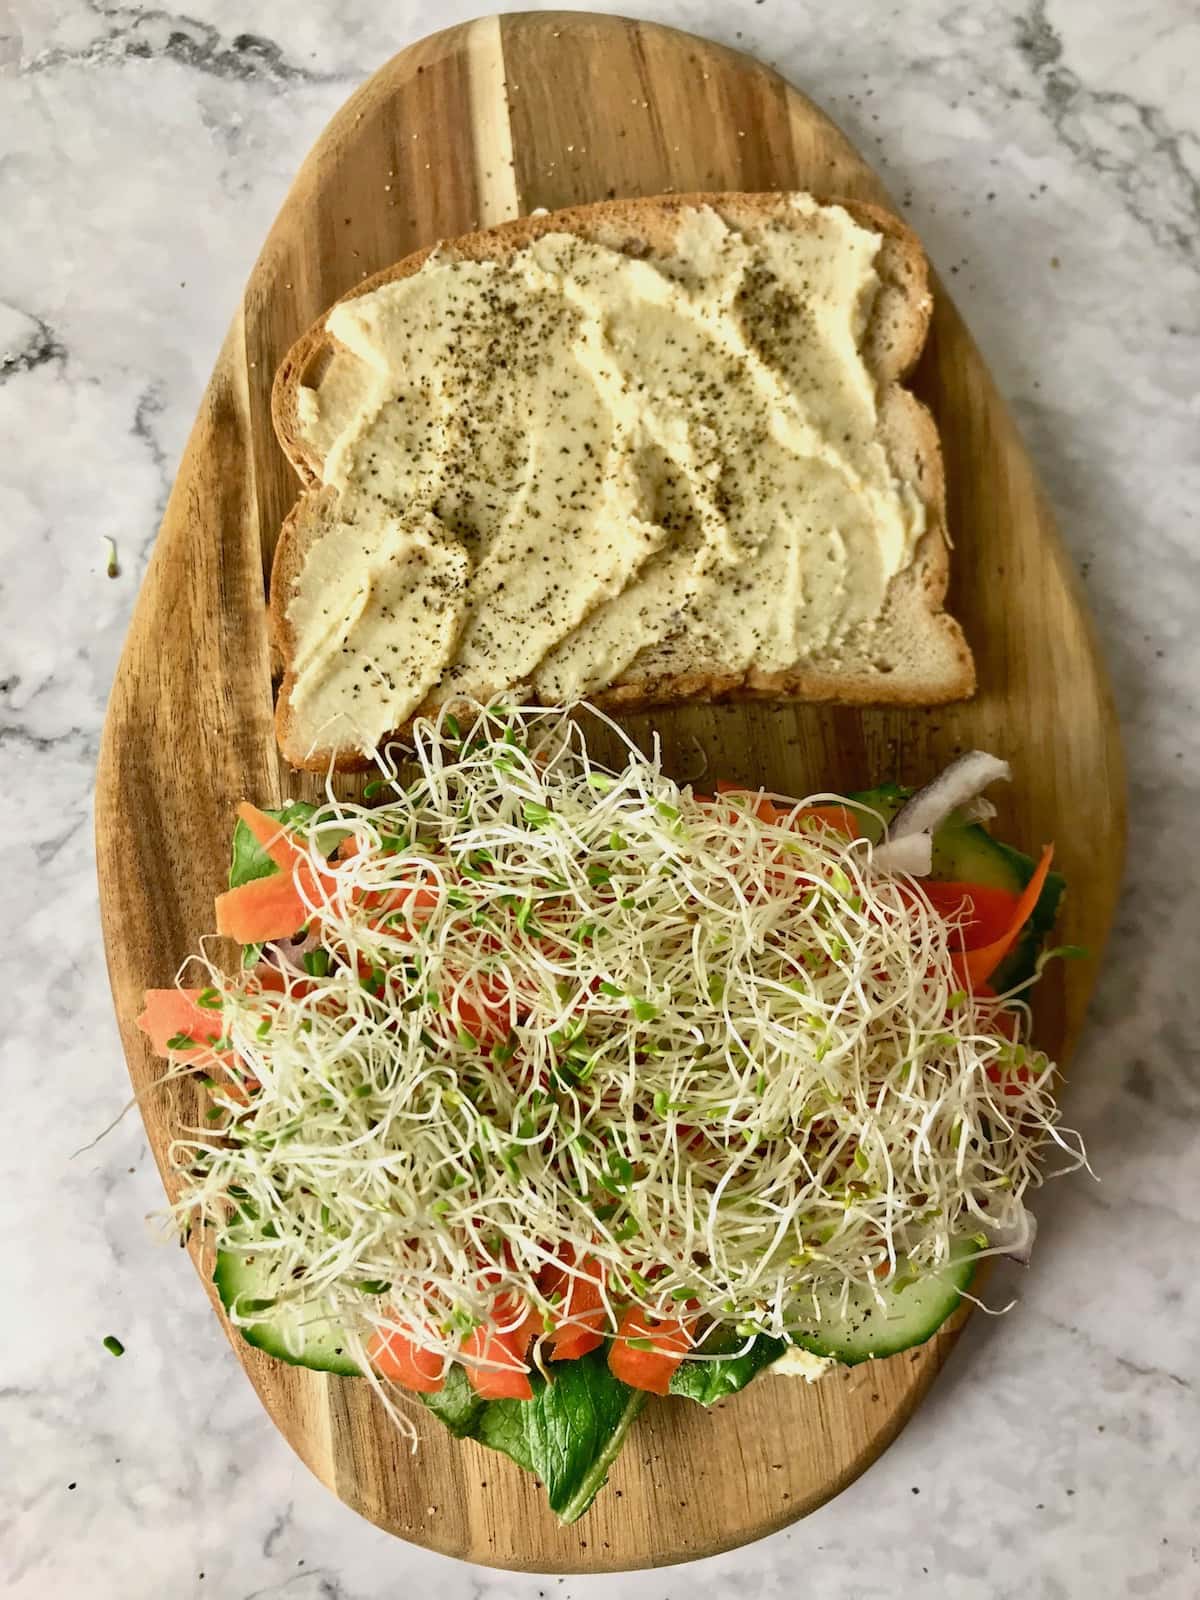 Two slices of bread, one topped with hummus, the other topped with various veggies, with sprouts on top.